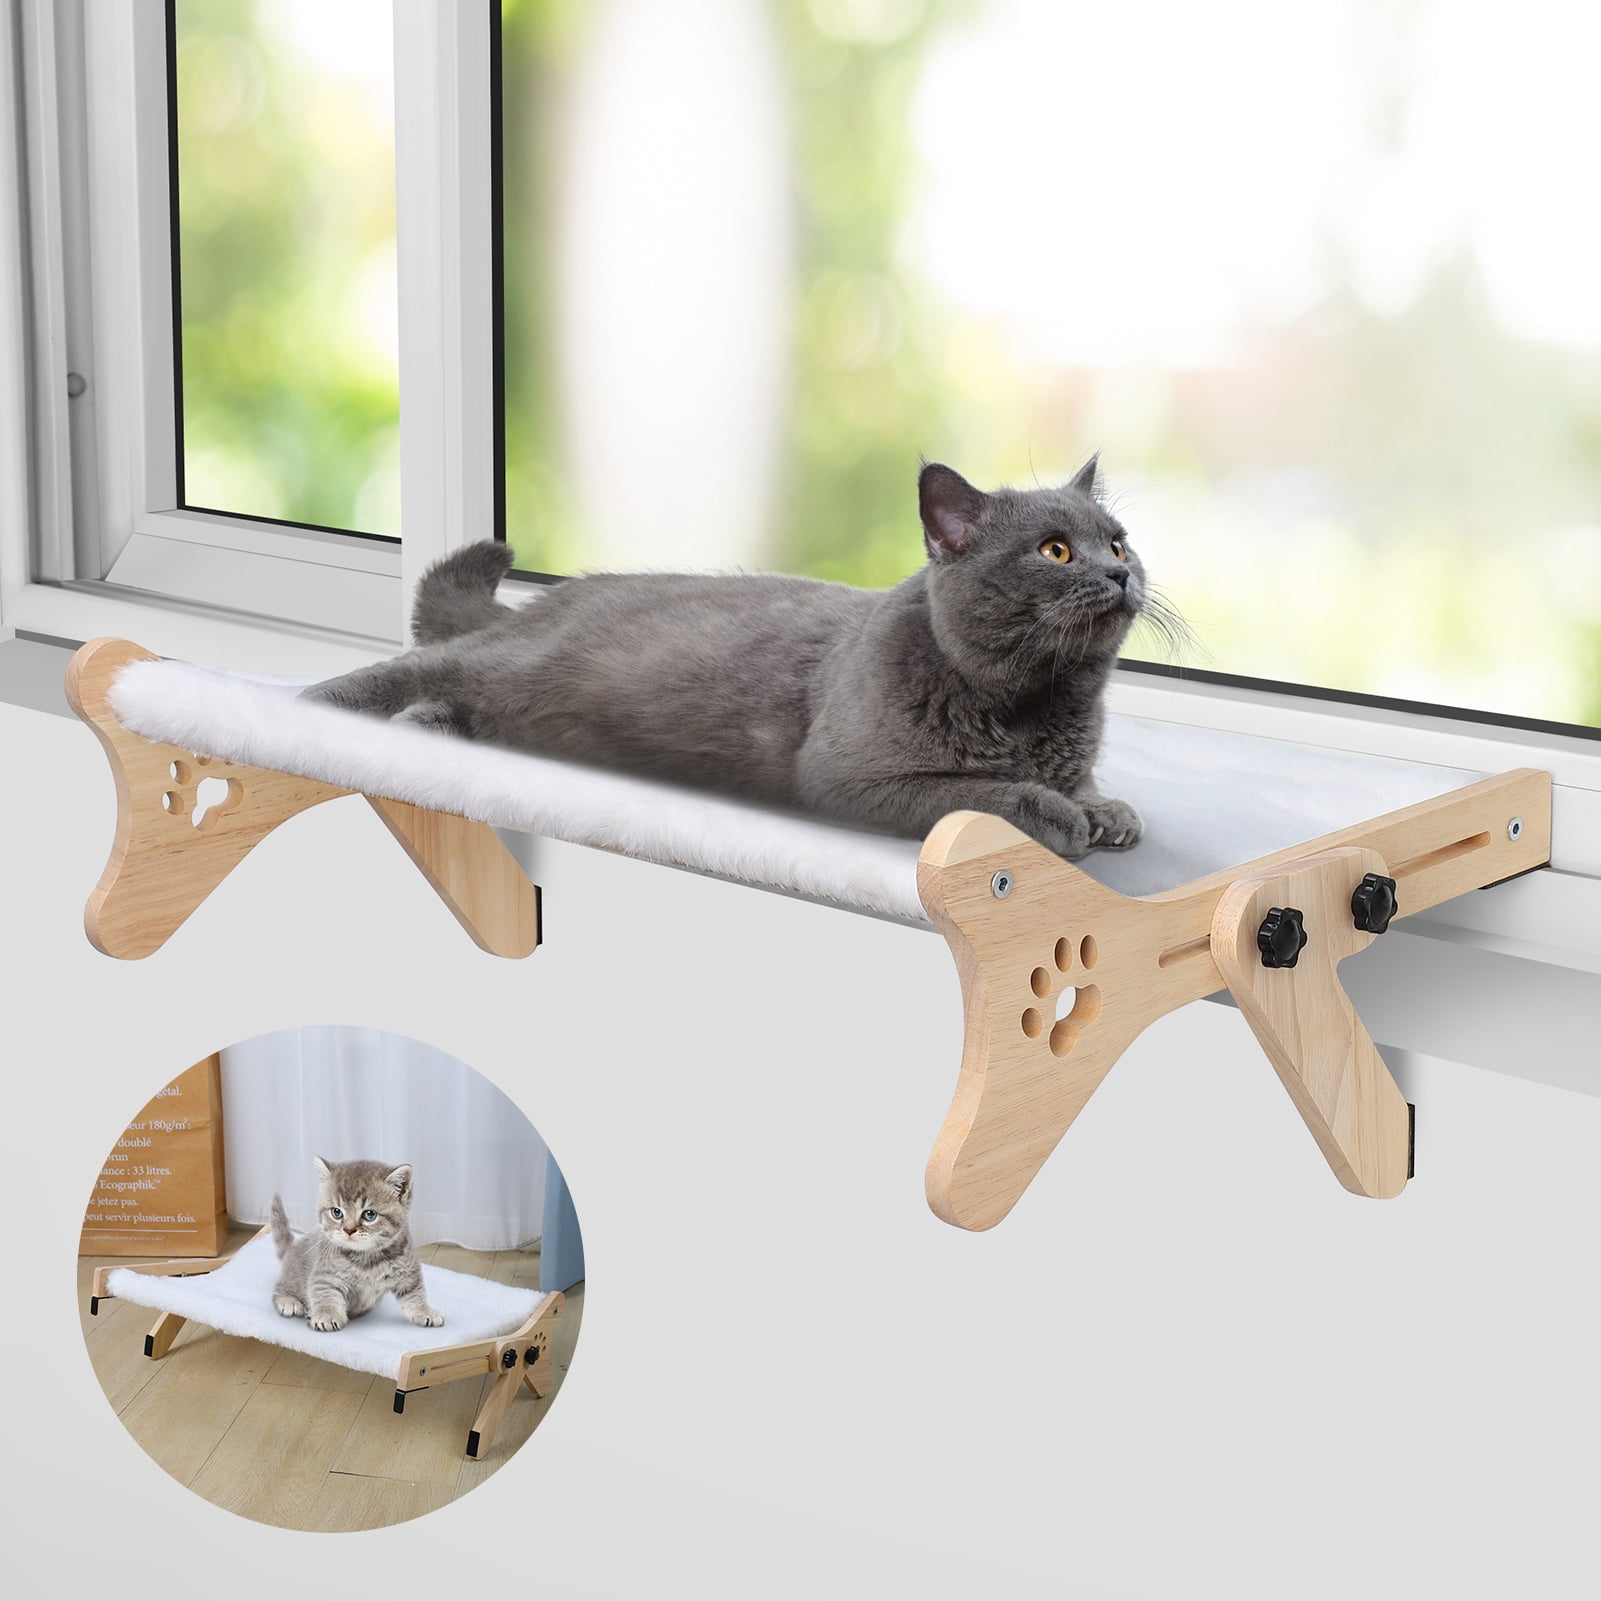 Hequsigns Cat Sill Window Perch, Cat Window Perch with Wood Frame for Large Cats, Adjustable Cat Window Bed for Windowsill, Bedside, Drawer and